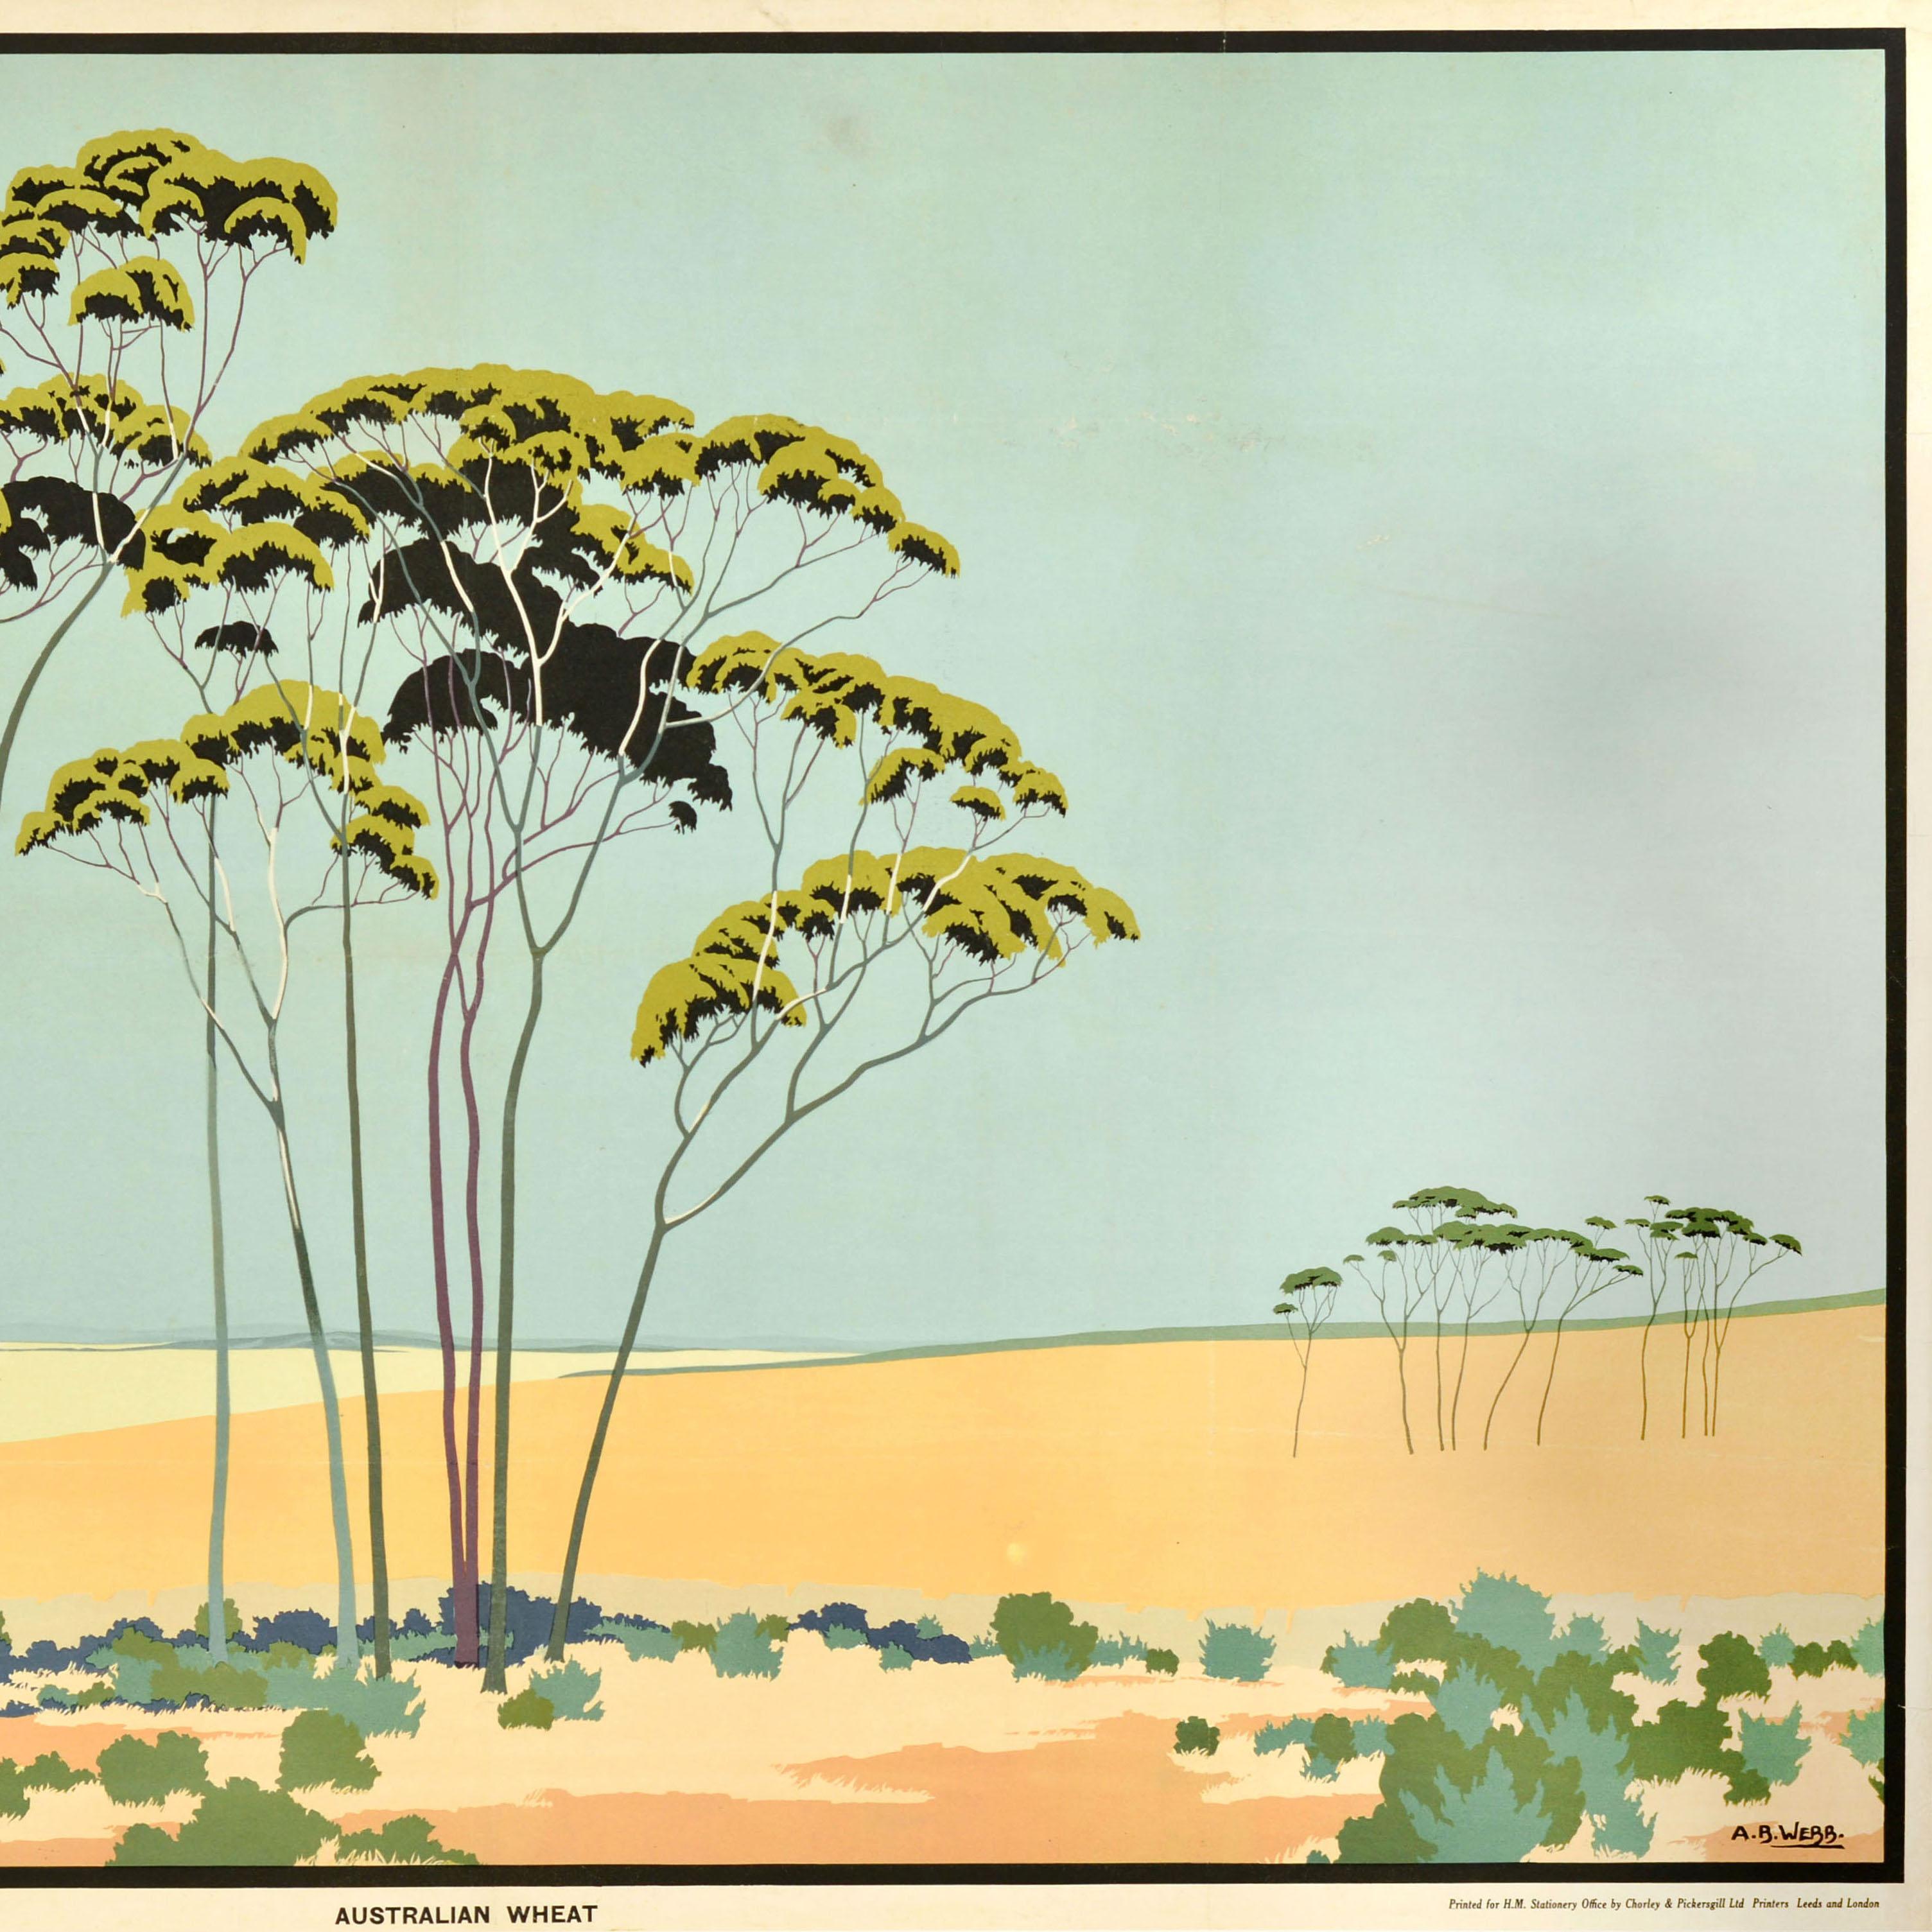 Original vintage poster - Australian Wheat - issued by the Empire Marketing Board (EMB 1926-1933) featuring stunning artwork by Archibald Bertram Webb (1887-1944) depicting an agricultural view of tall trees in pale fields of wheat with the bold